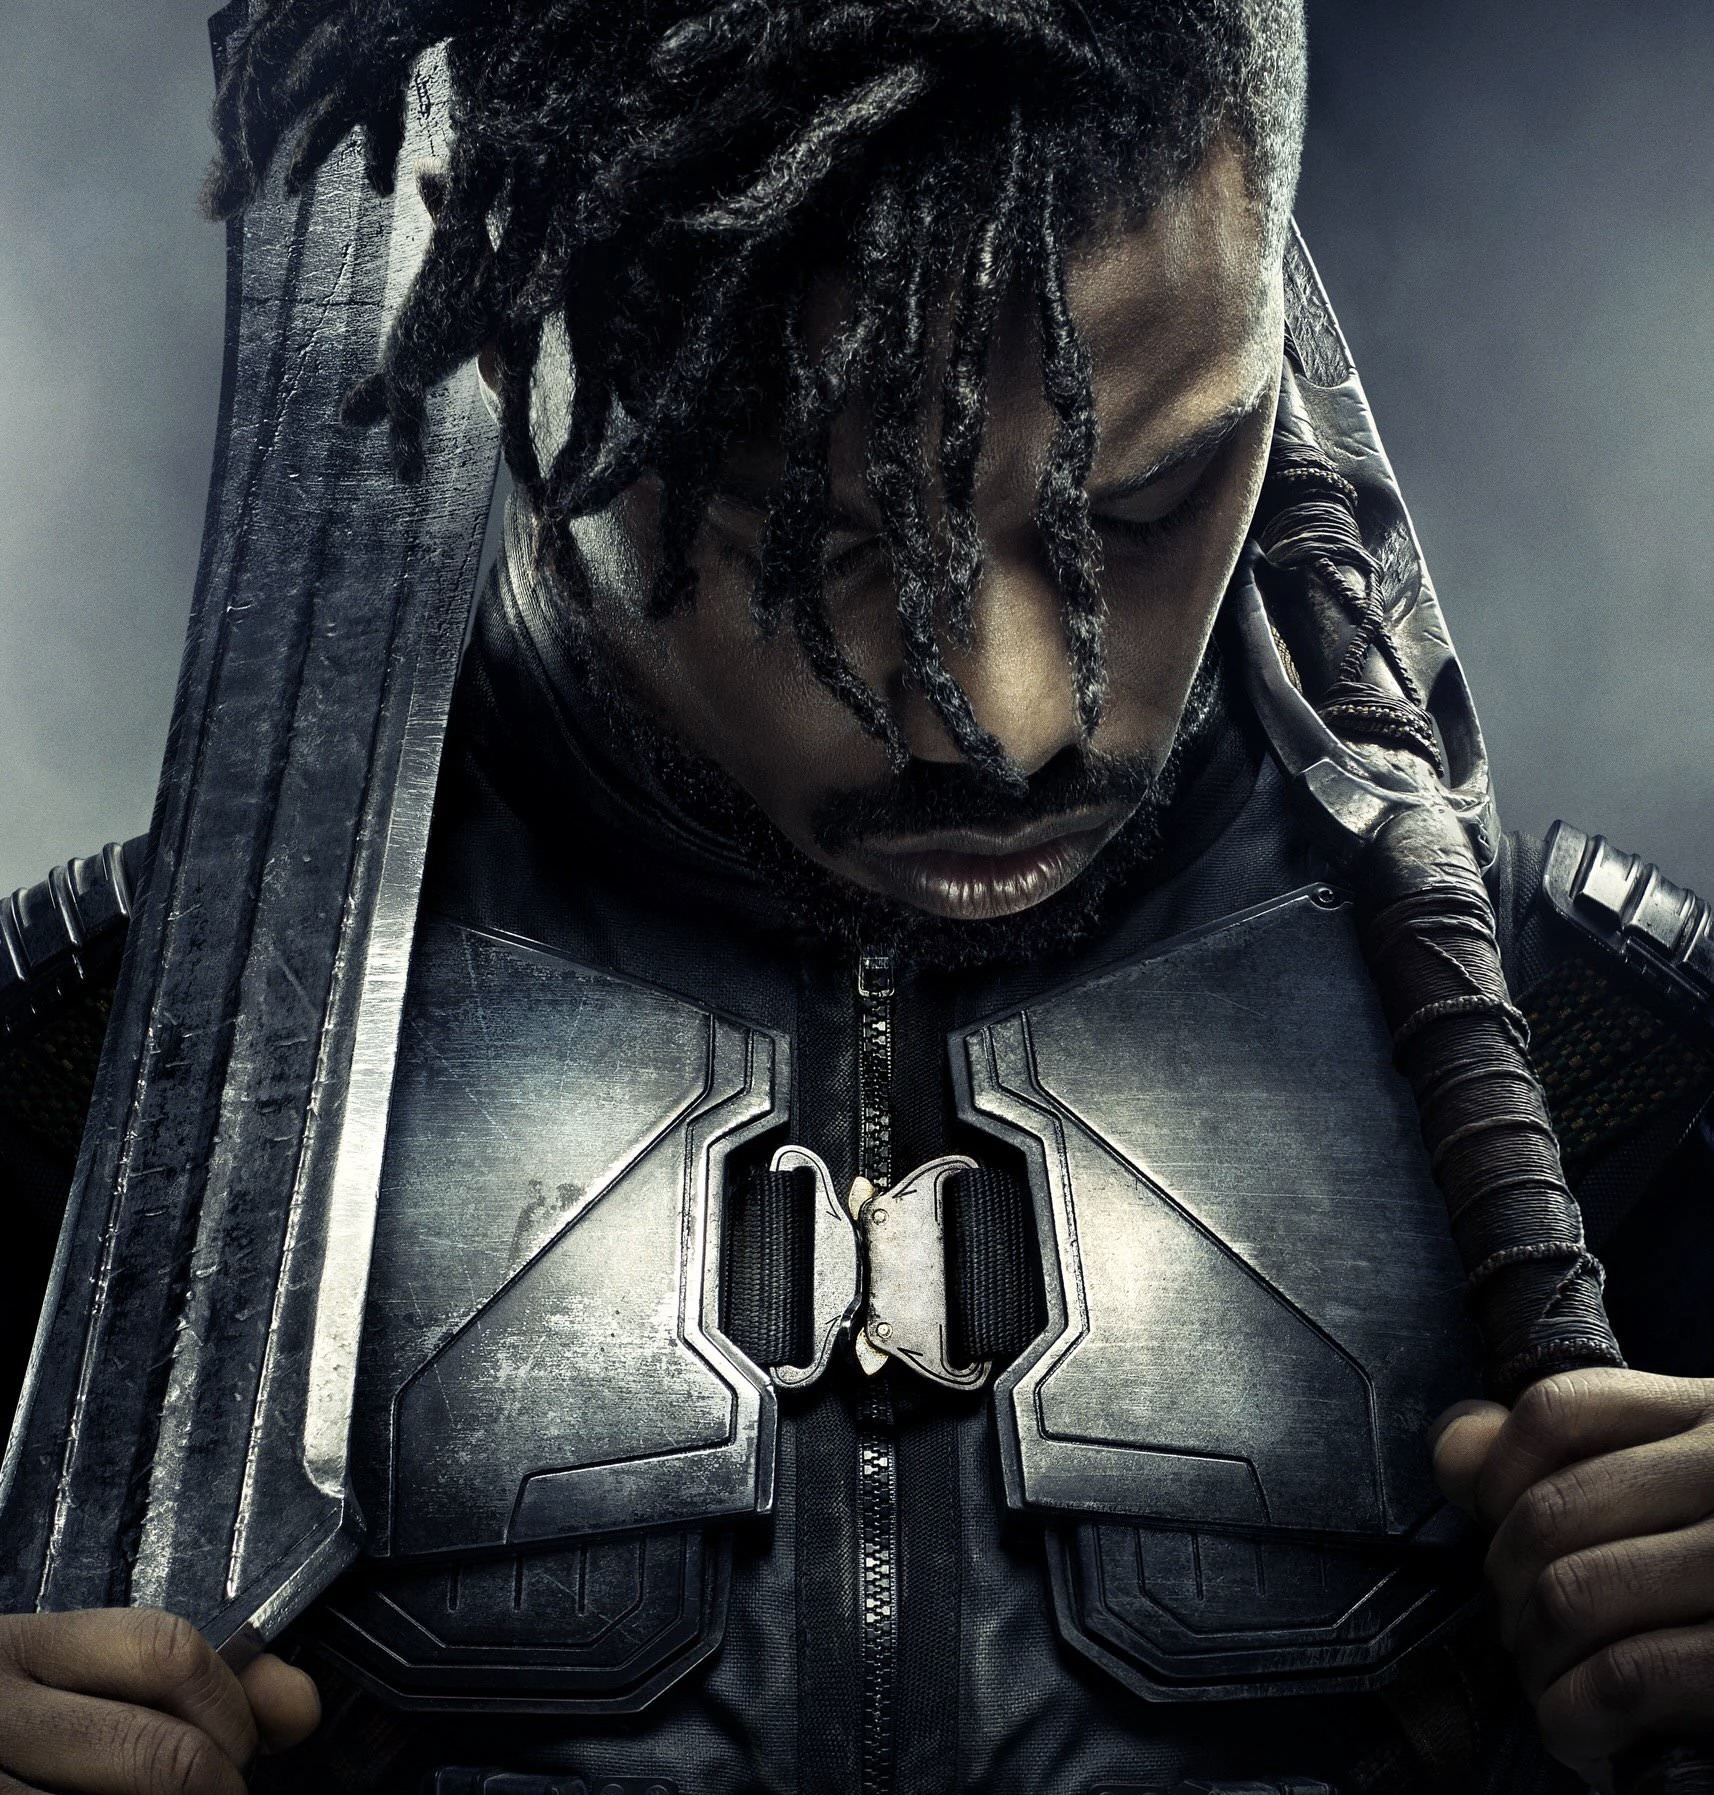 Will Michael B. Jordan Still Be In Marvel Movies? 'Black Panther' Has Fans  Worried